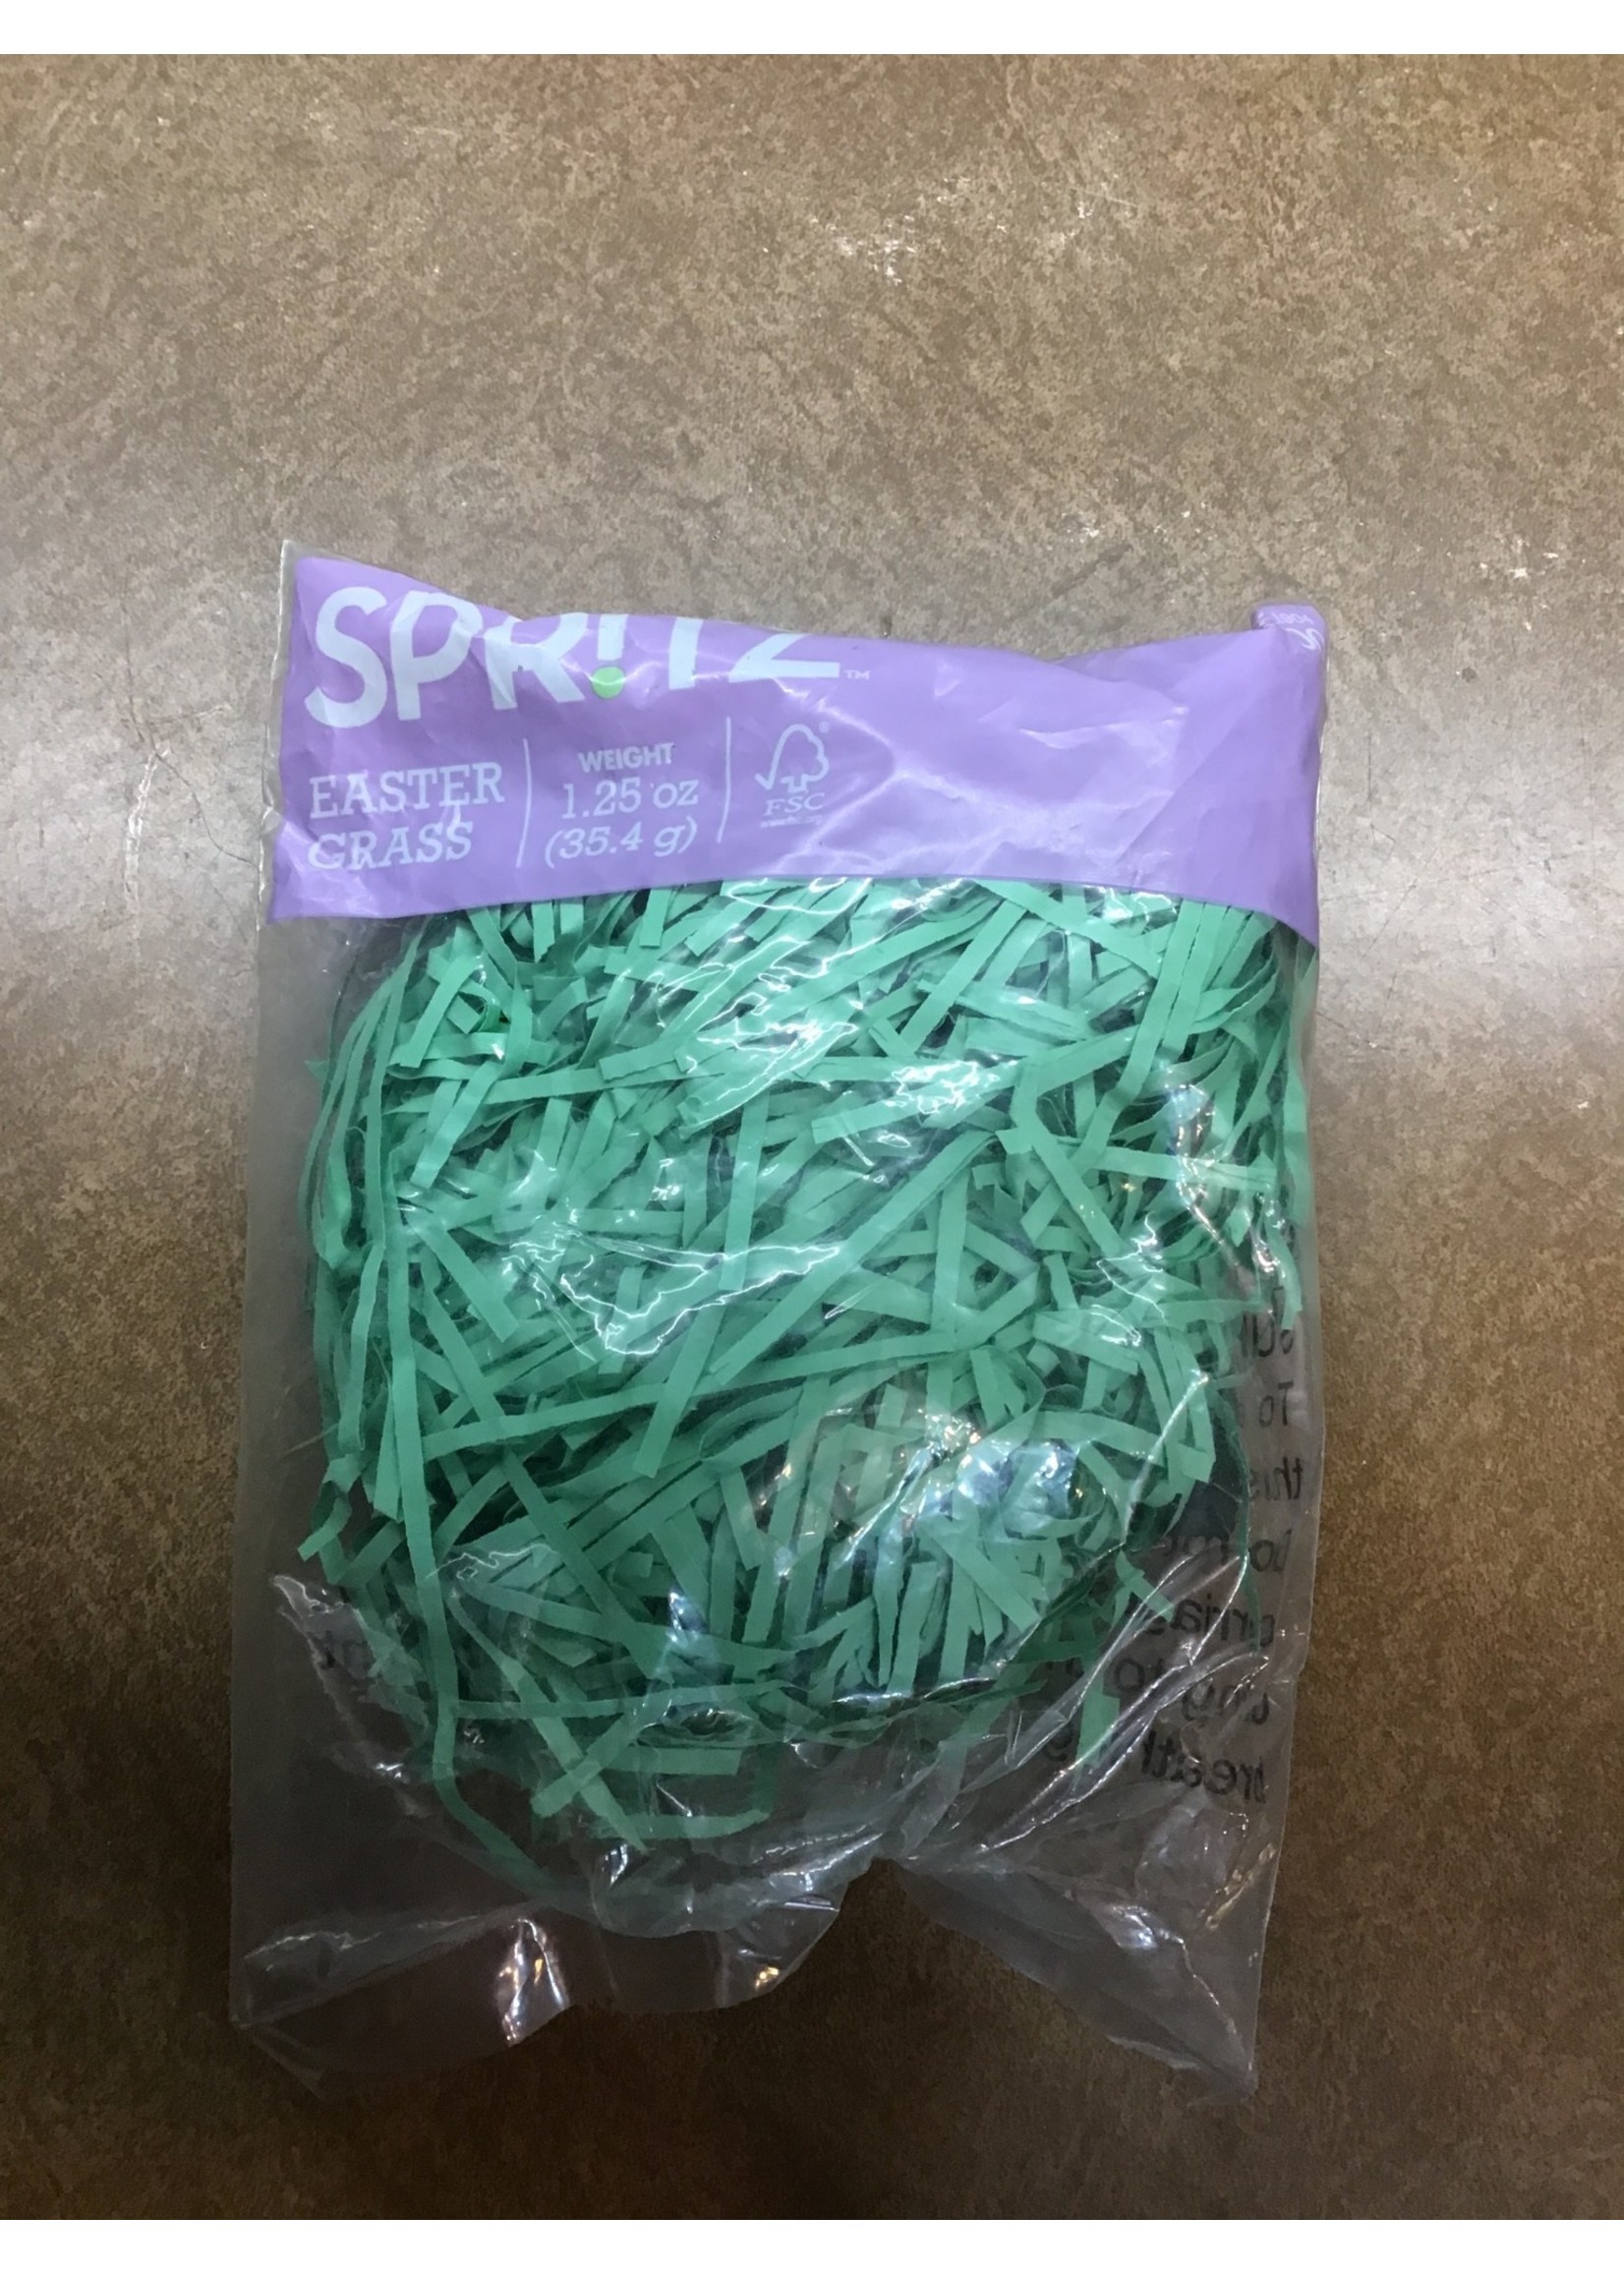 1.25oz Crinkle Easter Grass Cool Green - Spritz - D3 Surplus Outlet